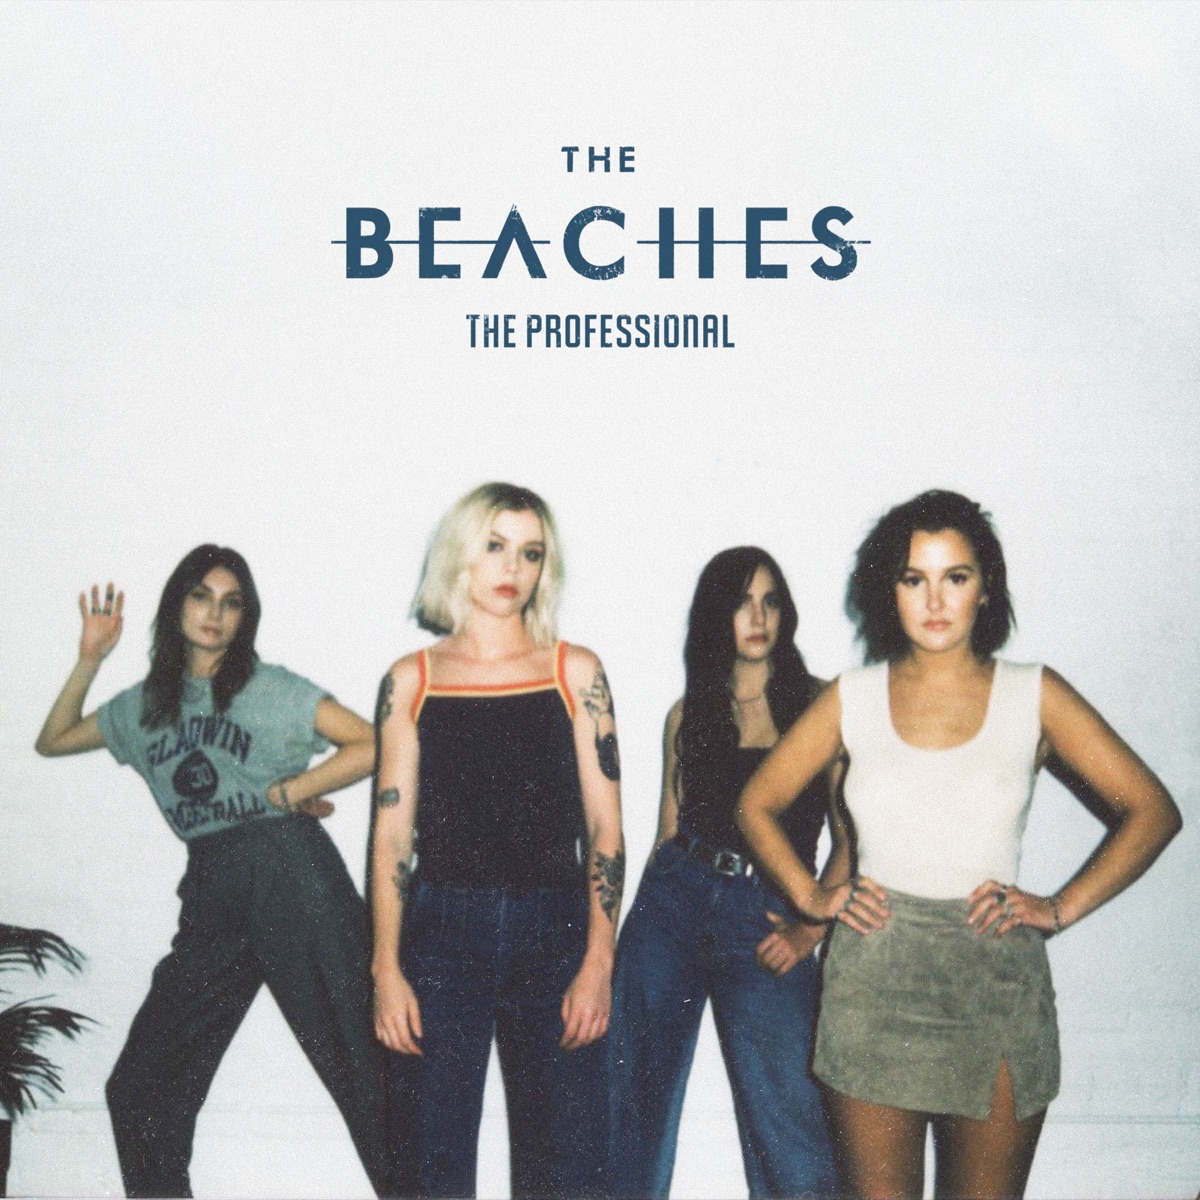 itty bitty titty committee - EP - Album by The Beaches - Apple Music